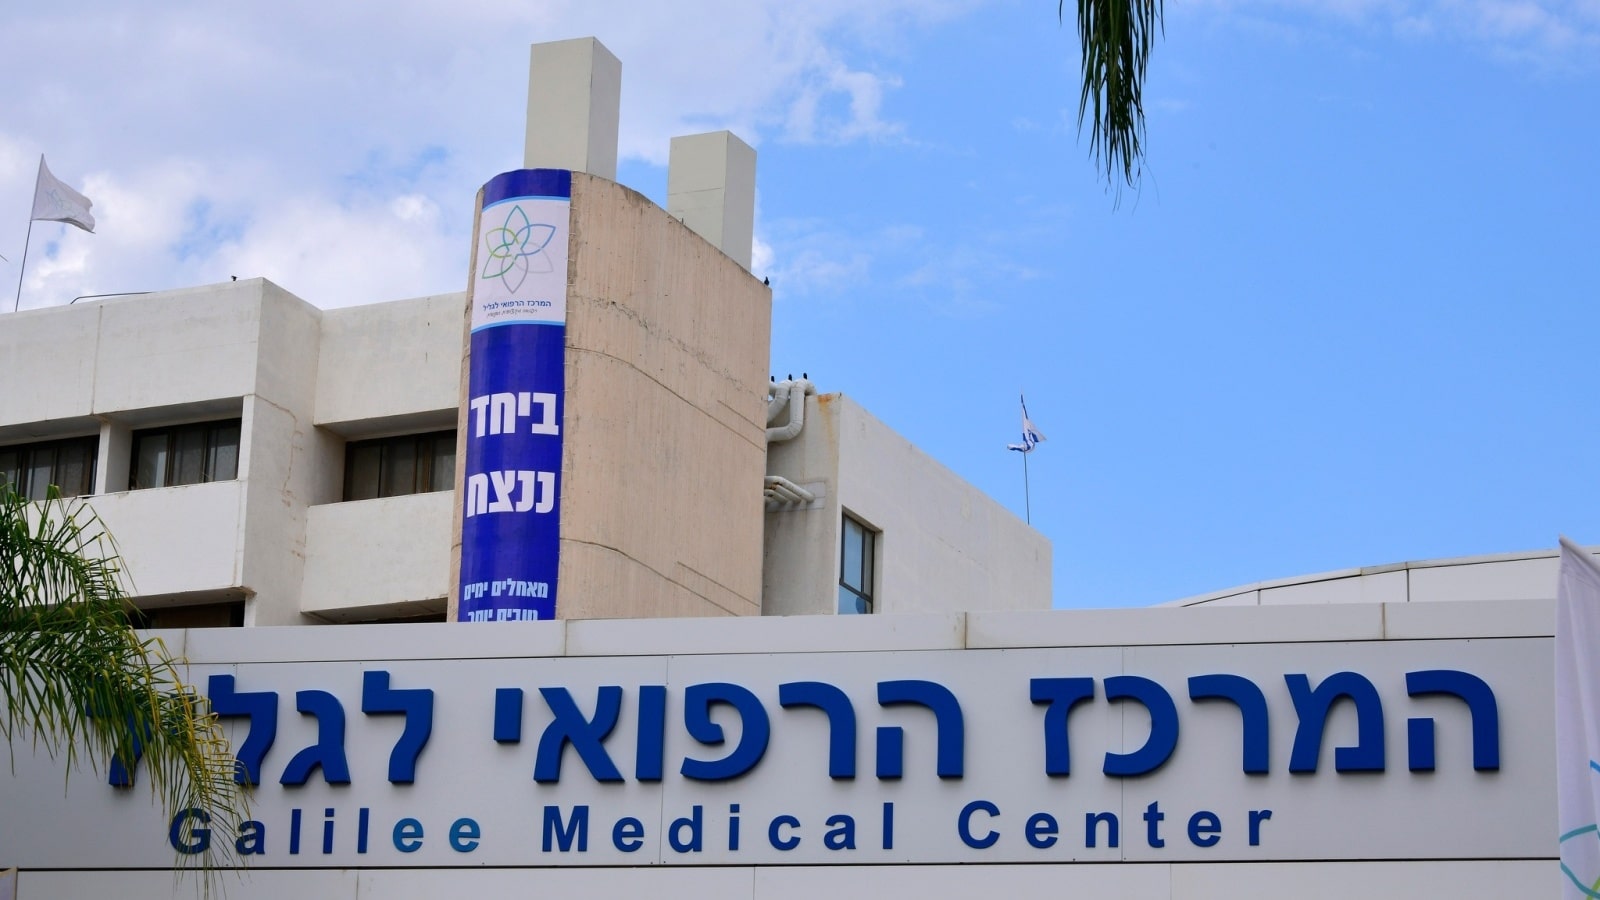 Galilee Medical Center is six miles from the Lebanon border. The sign in Hebrew says “Together We Will Win.” Photo by Roni Albert